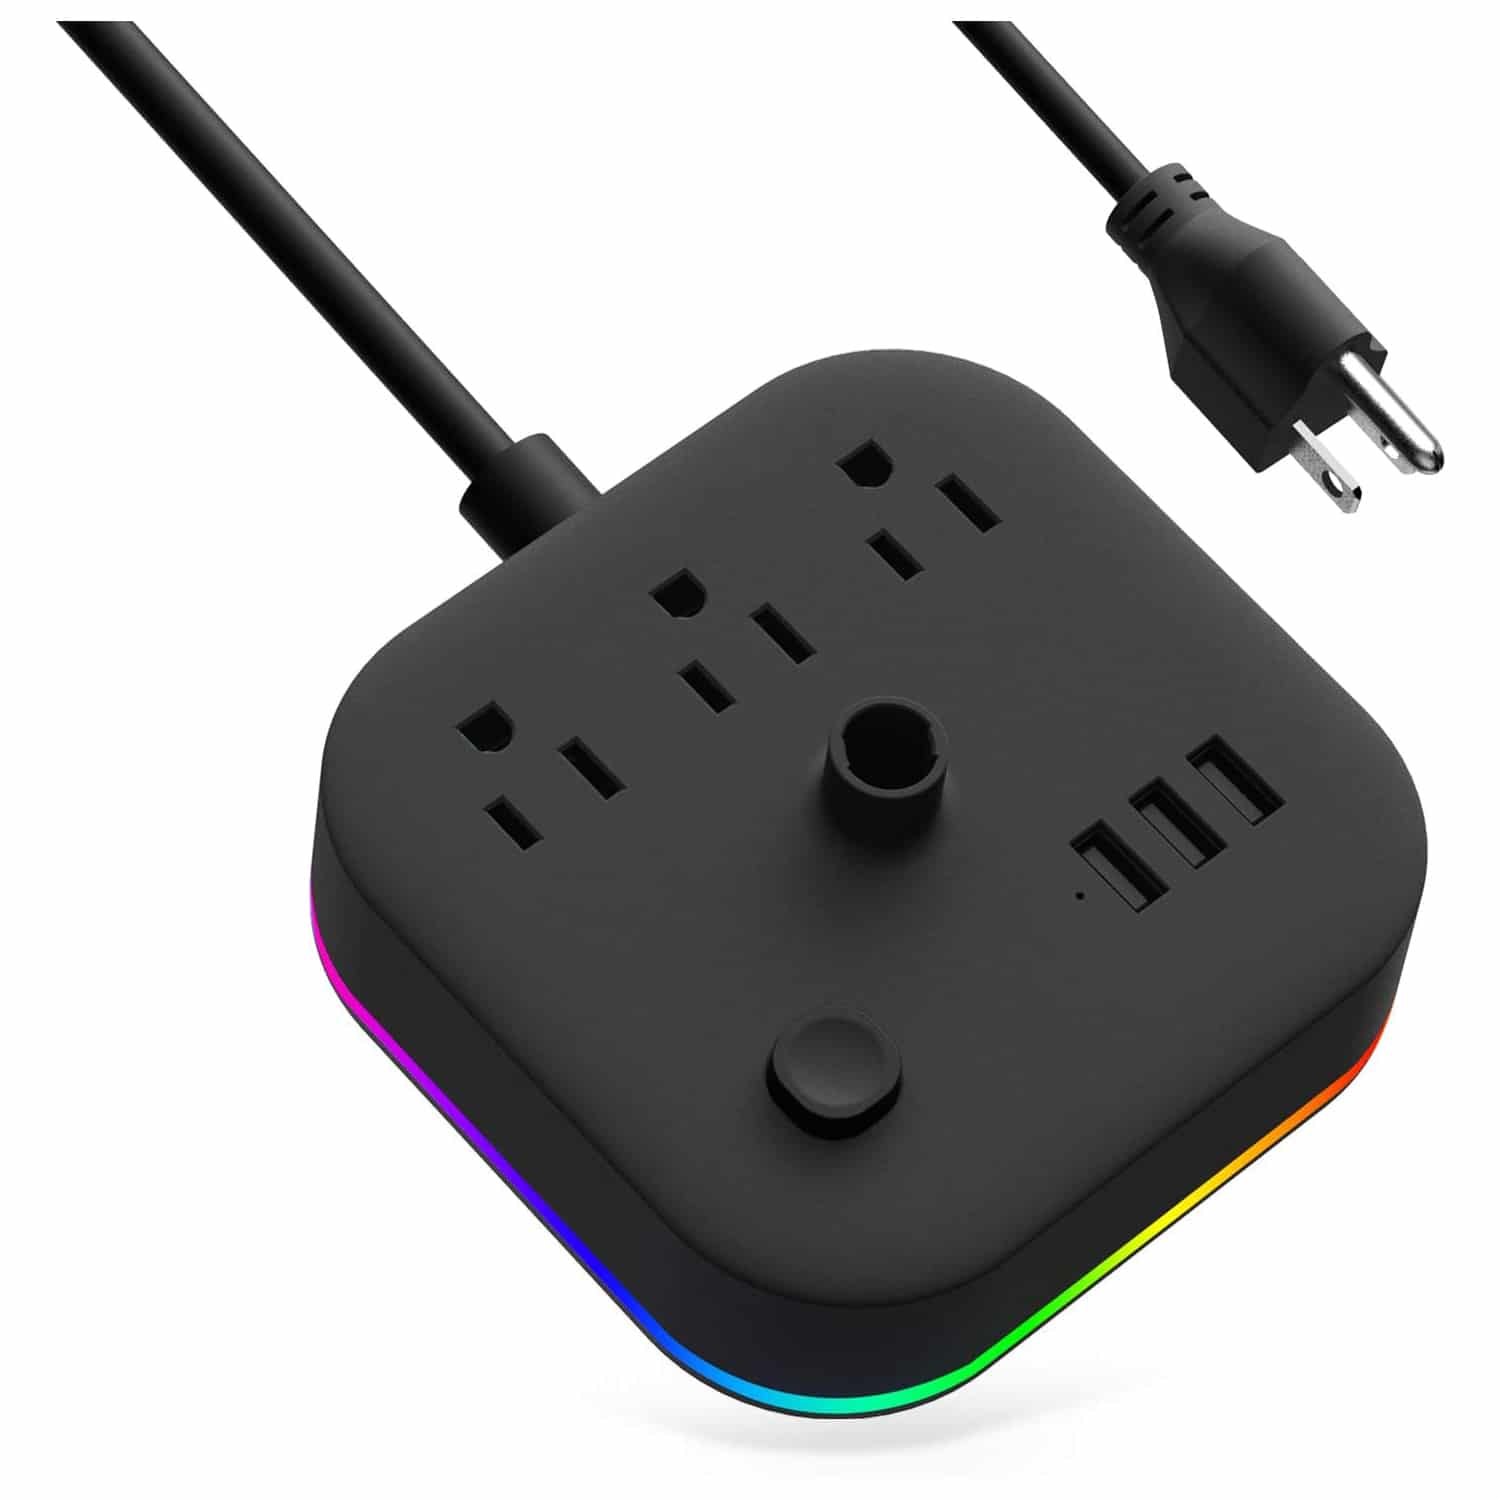 HAVIT DPM05 RGB Headset Stand with 3 USB Charging Ports & 3 Power Outlets